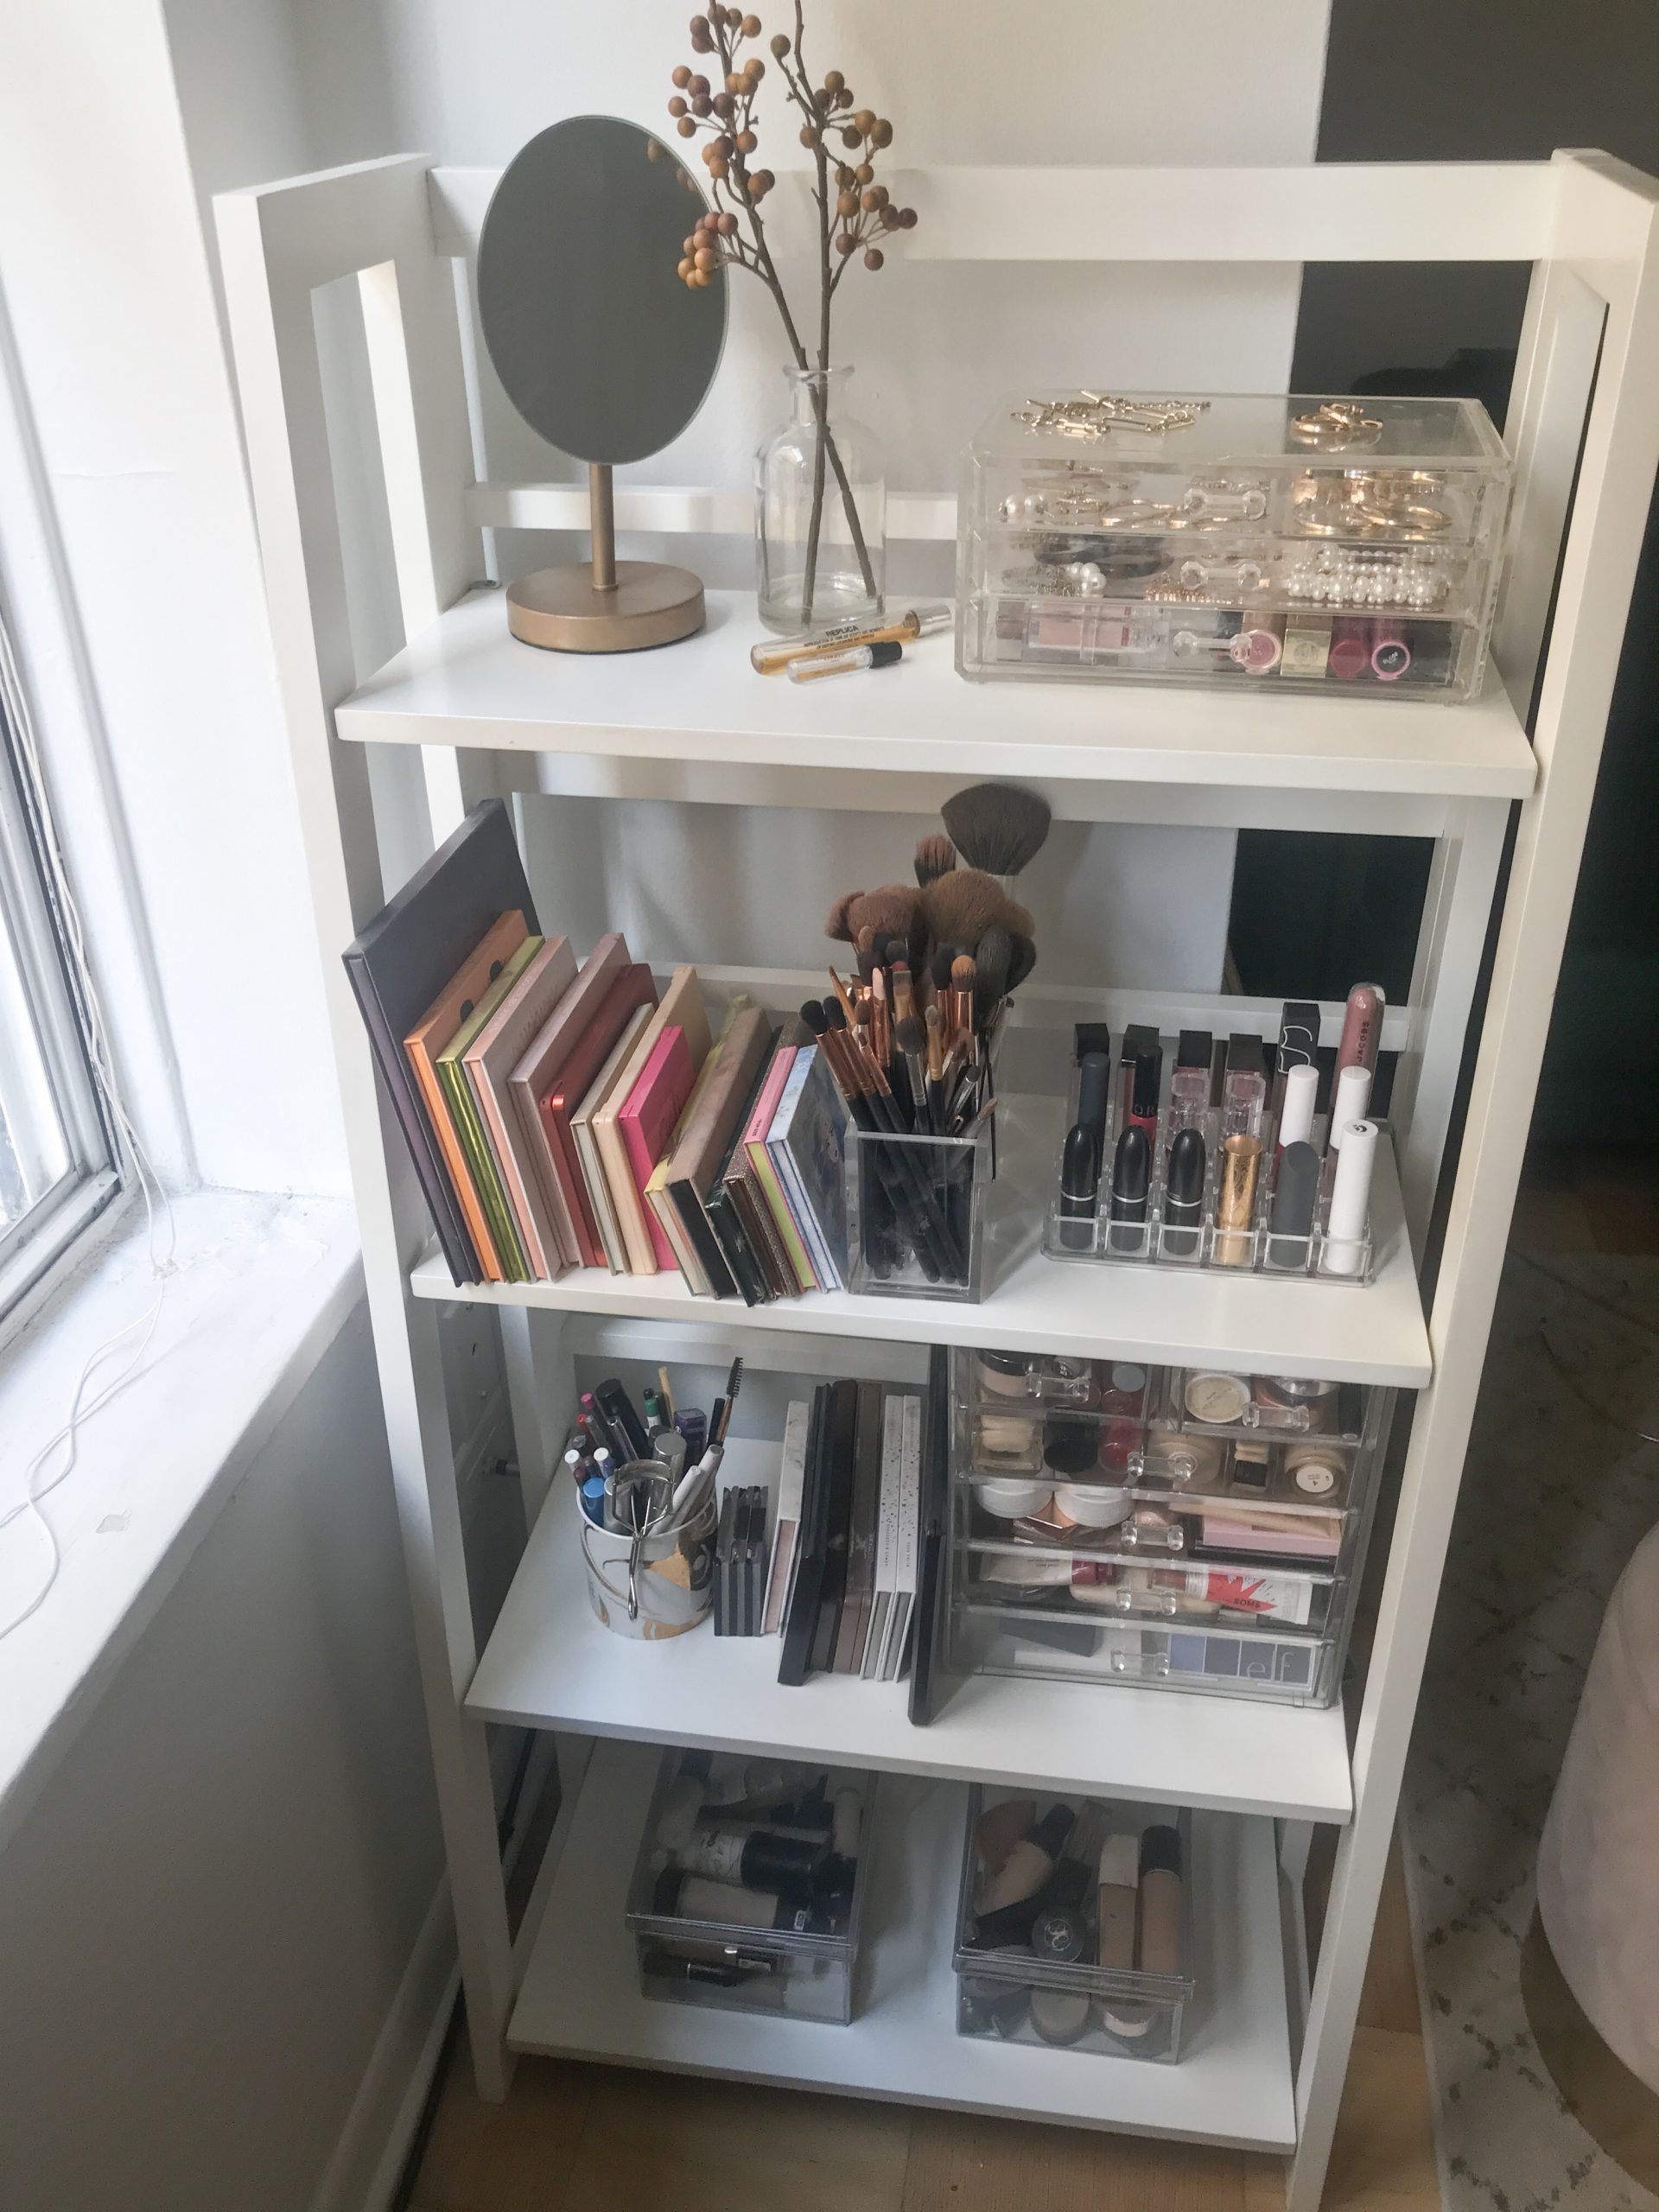 How I Decluttered and Organized My Makeup Stash - How I Decluttered and Organized My Makeup Stash -   18 beauty Room storage ideas